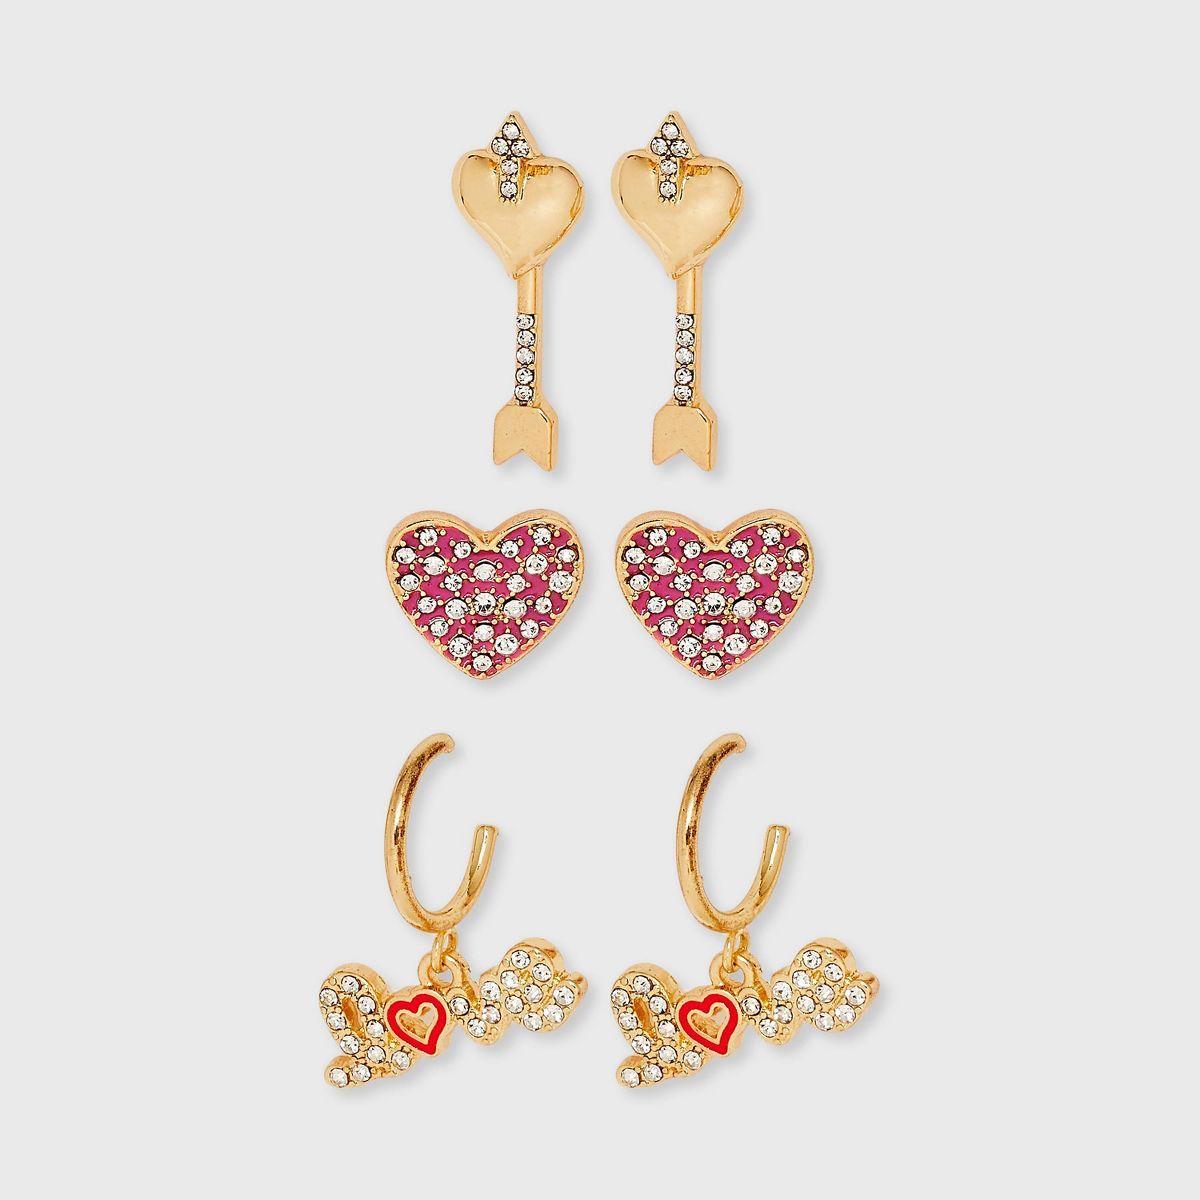 SUGARFIX by BaubleBar Falling For You Hoop Earring Set 3pc - Gold/Pink | Target